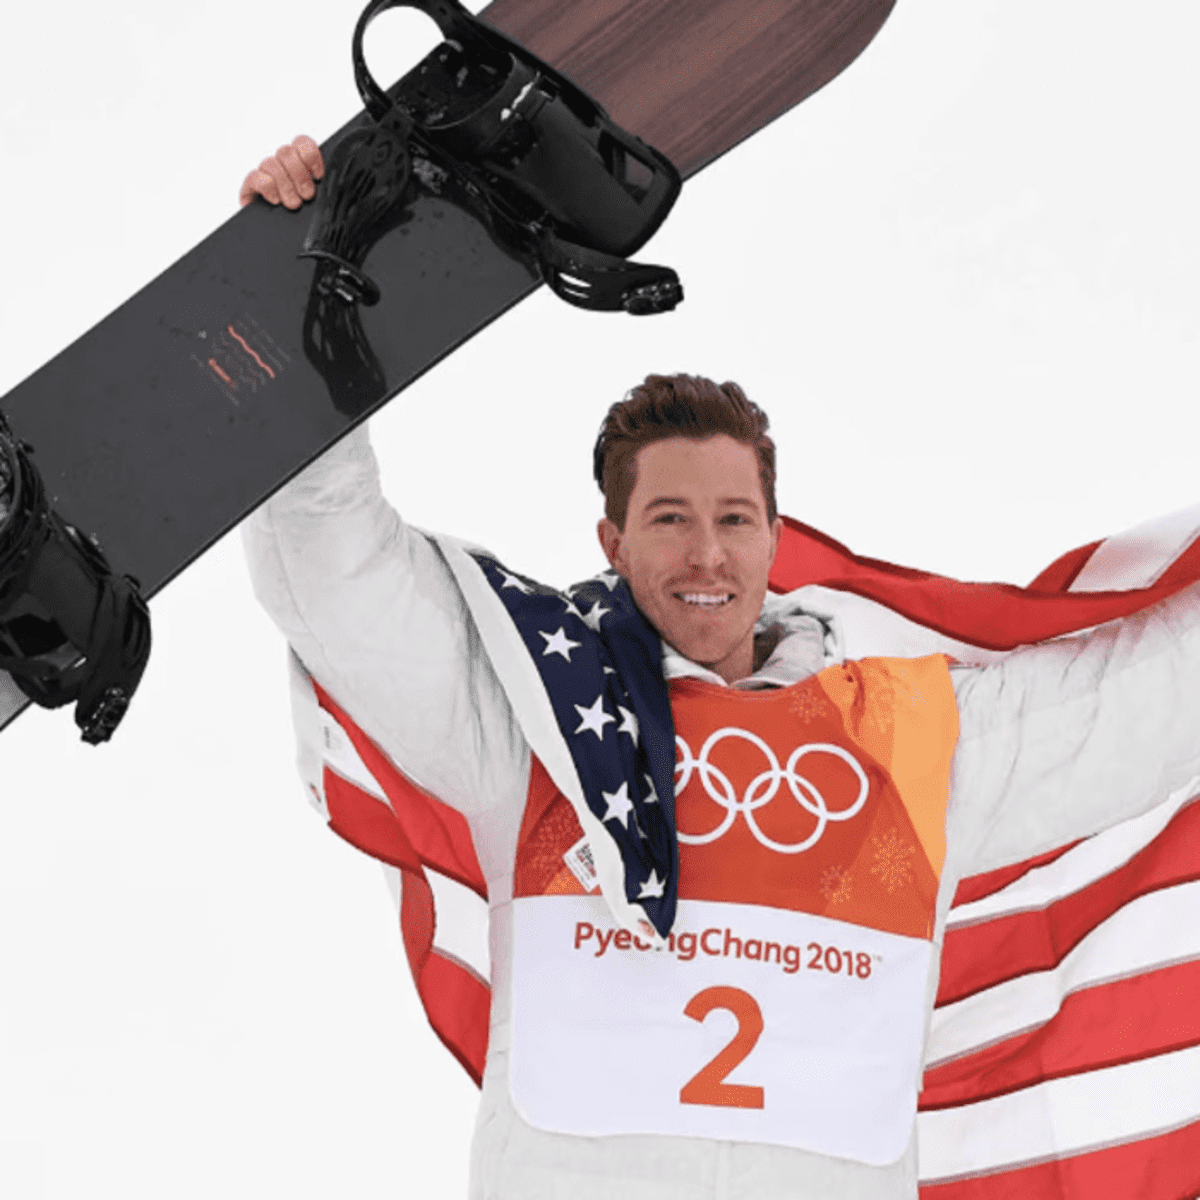 Shaun White's Signature Snowboard Line Sells Out In First Year of